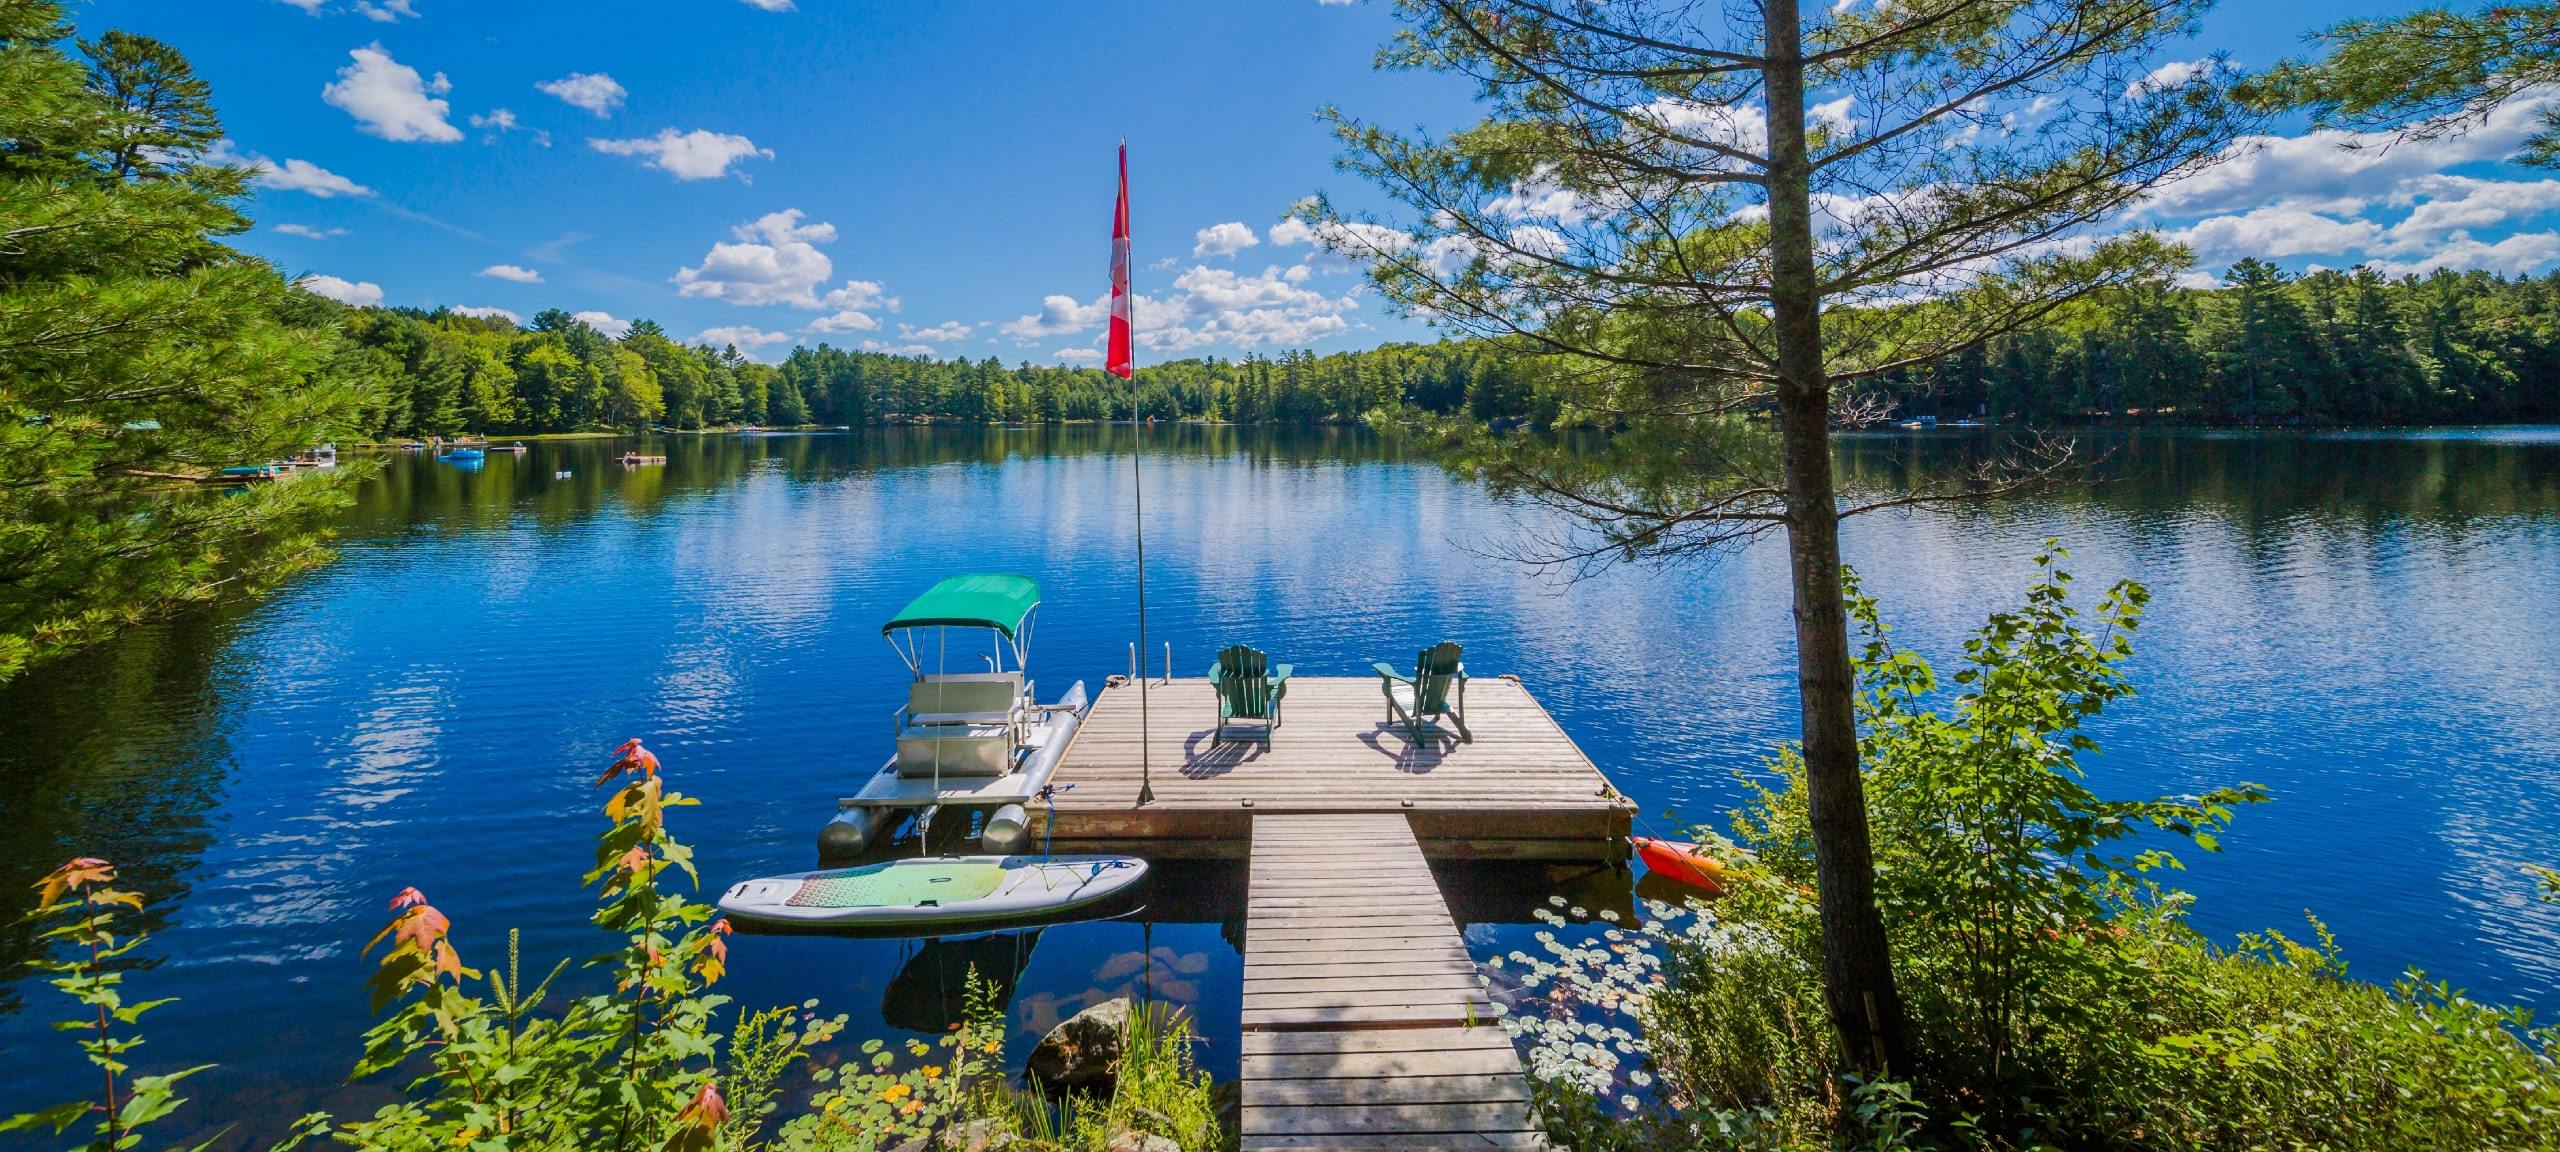 Gorgeous lake view from home dock in Muskoka, with two chairs and a boat